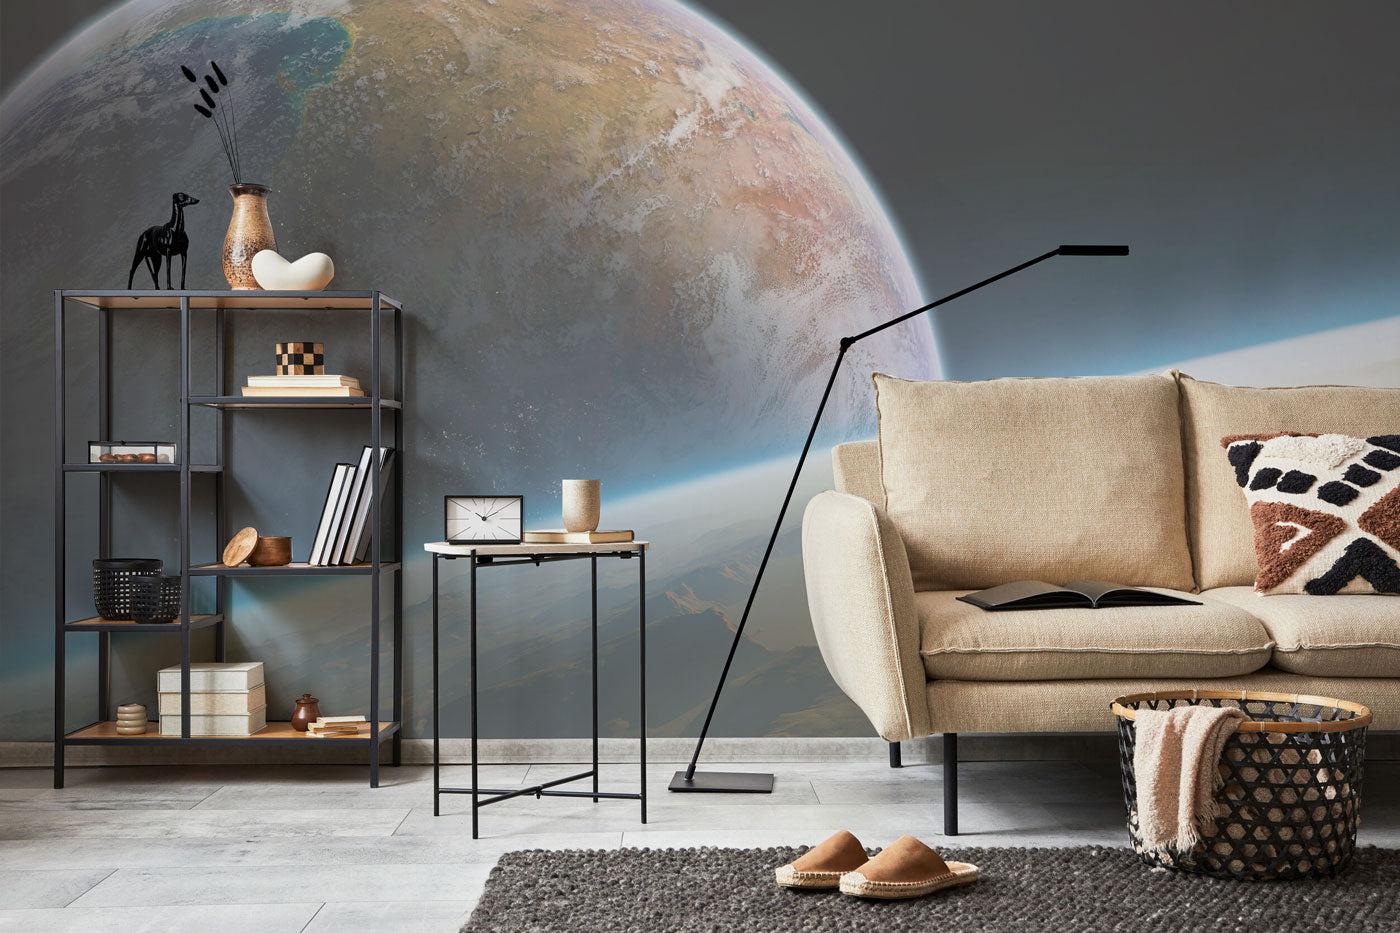 Orbital view of a planet Wall Mural-Wall Mural-Eazywallz